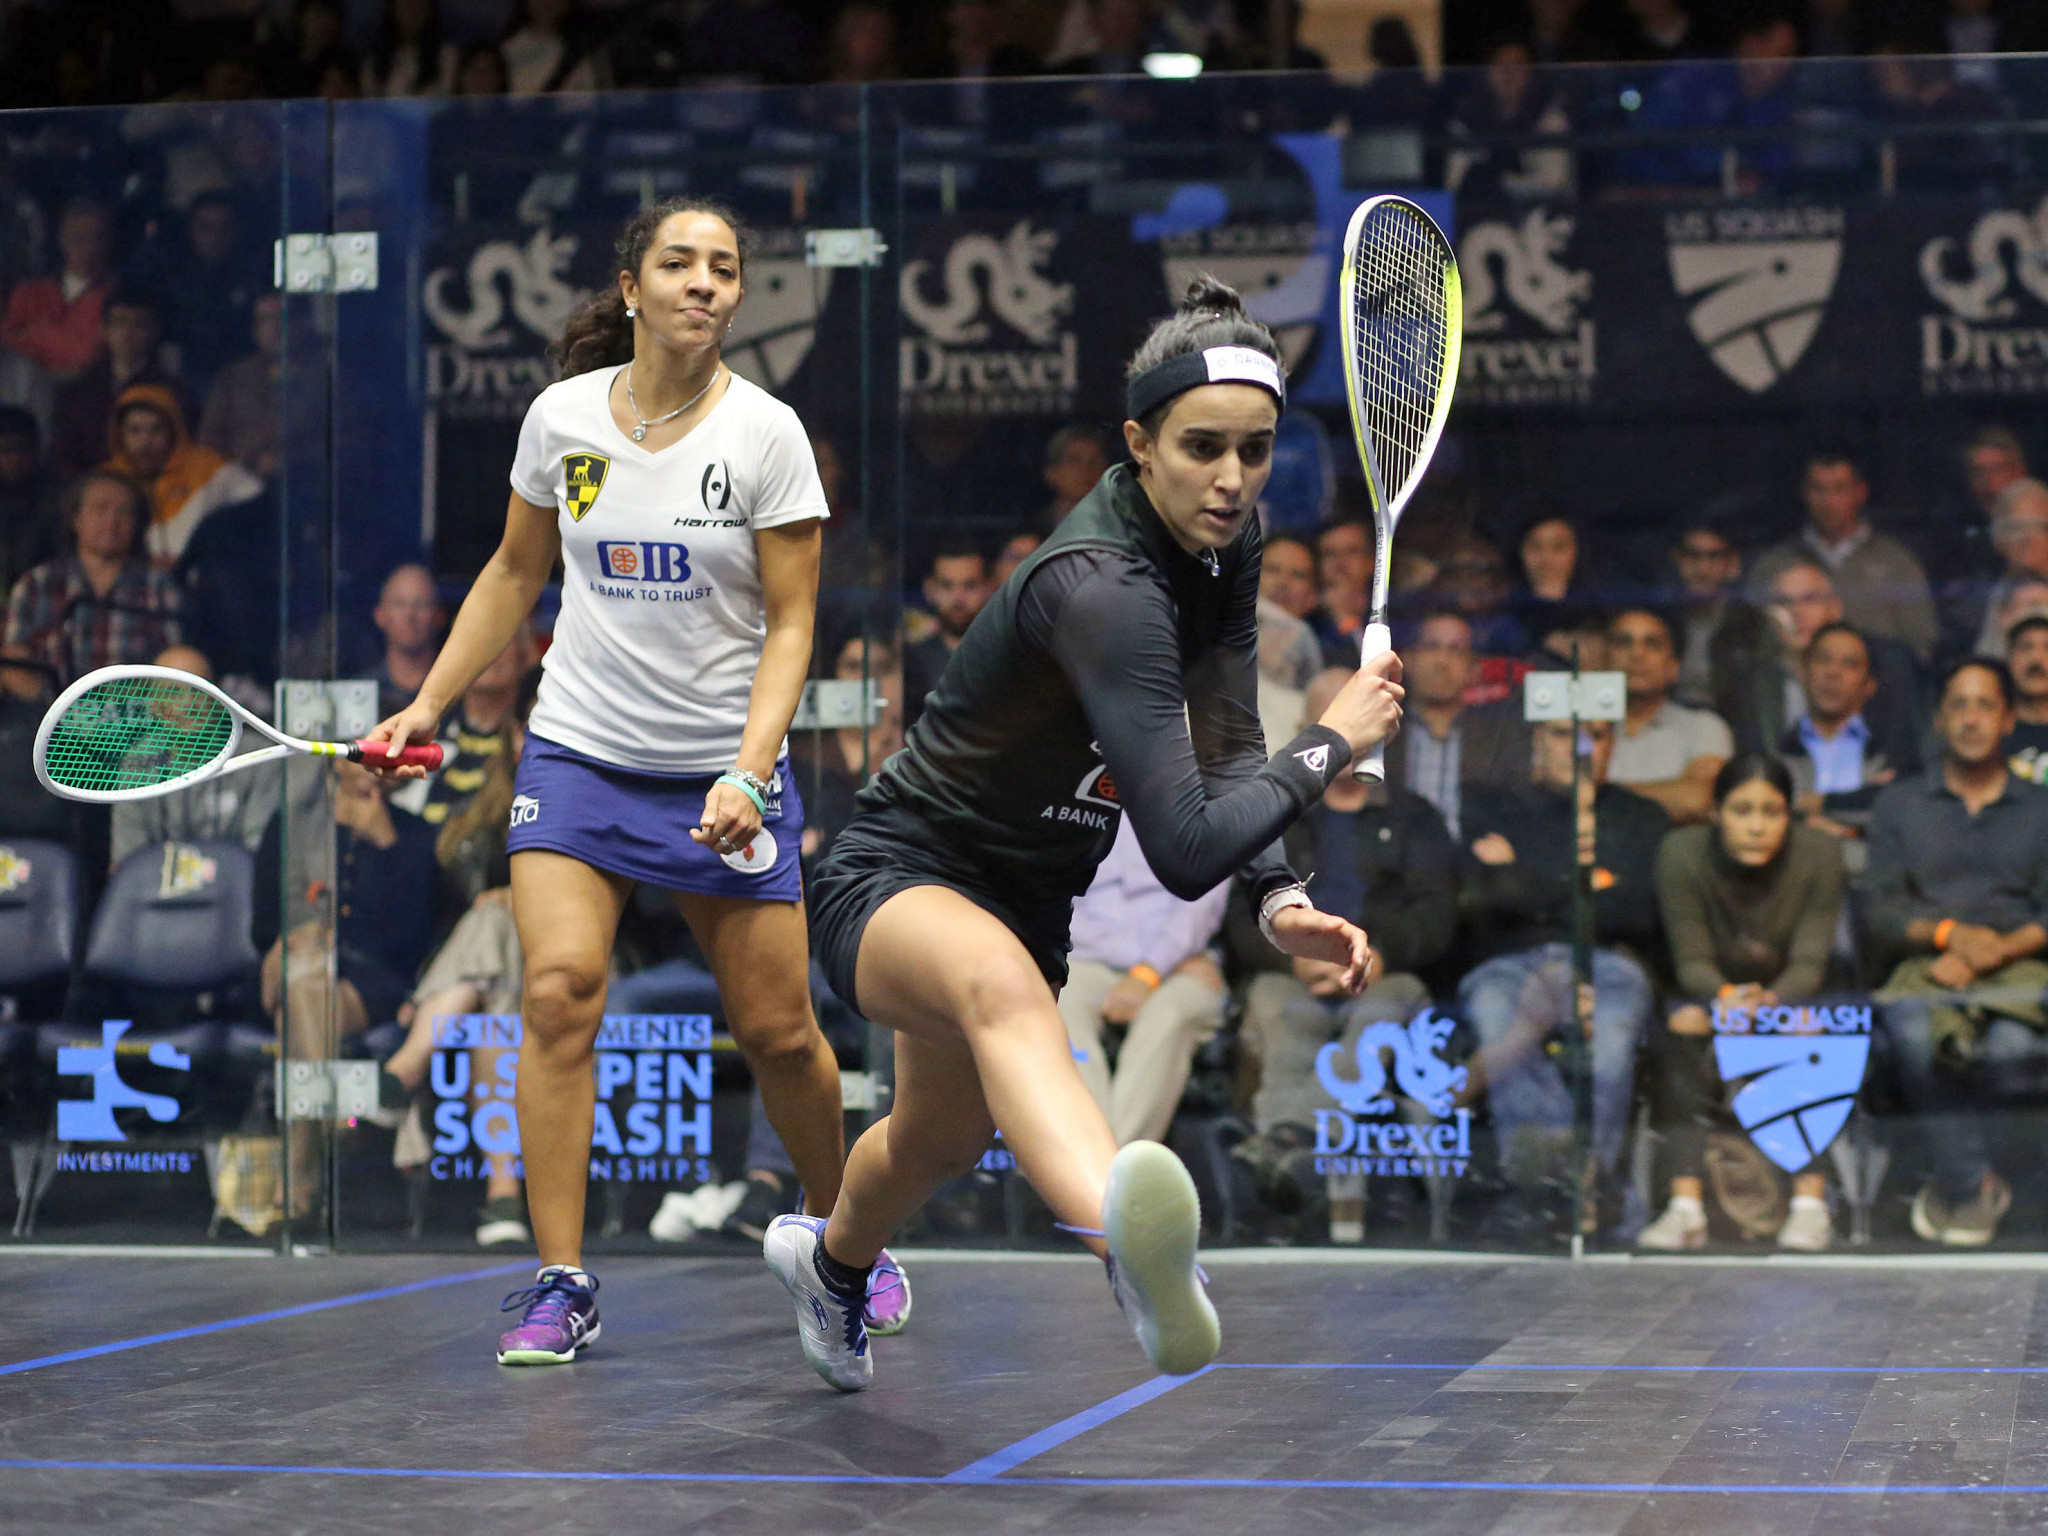 Married couple El Tayeb and Farag reach finals at PSA U.S. Open